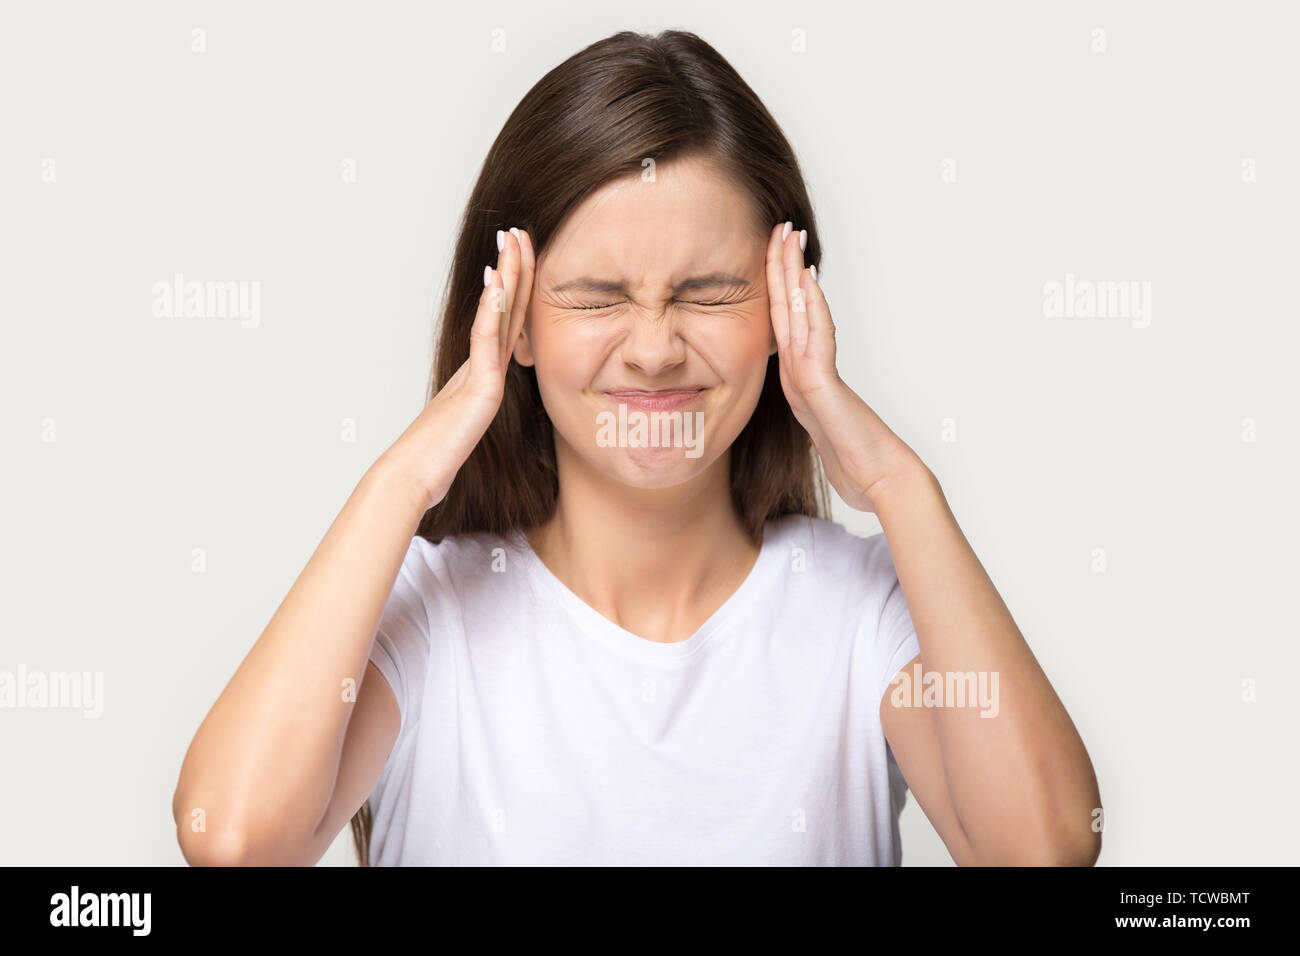 Head shot portrait stressed woman touching temples suffers from headache Stock Photo